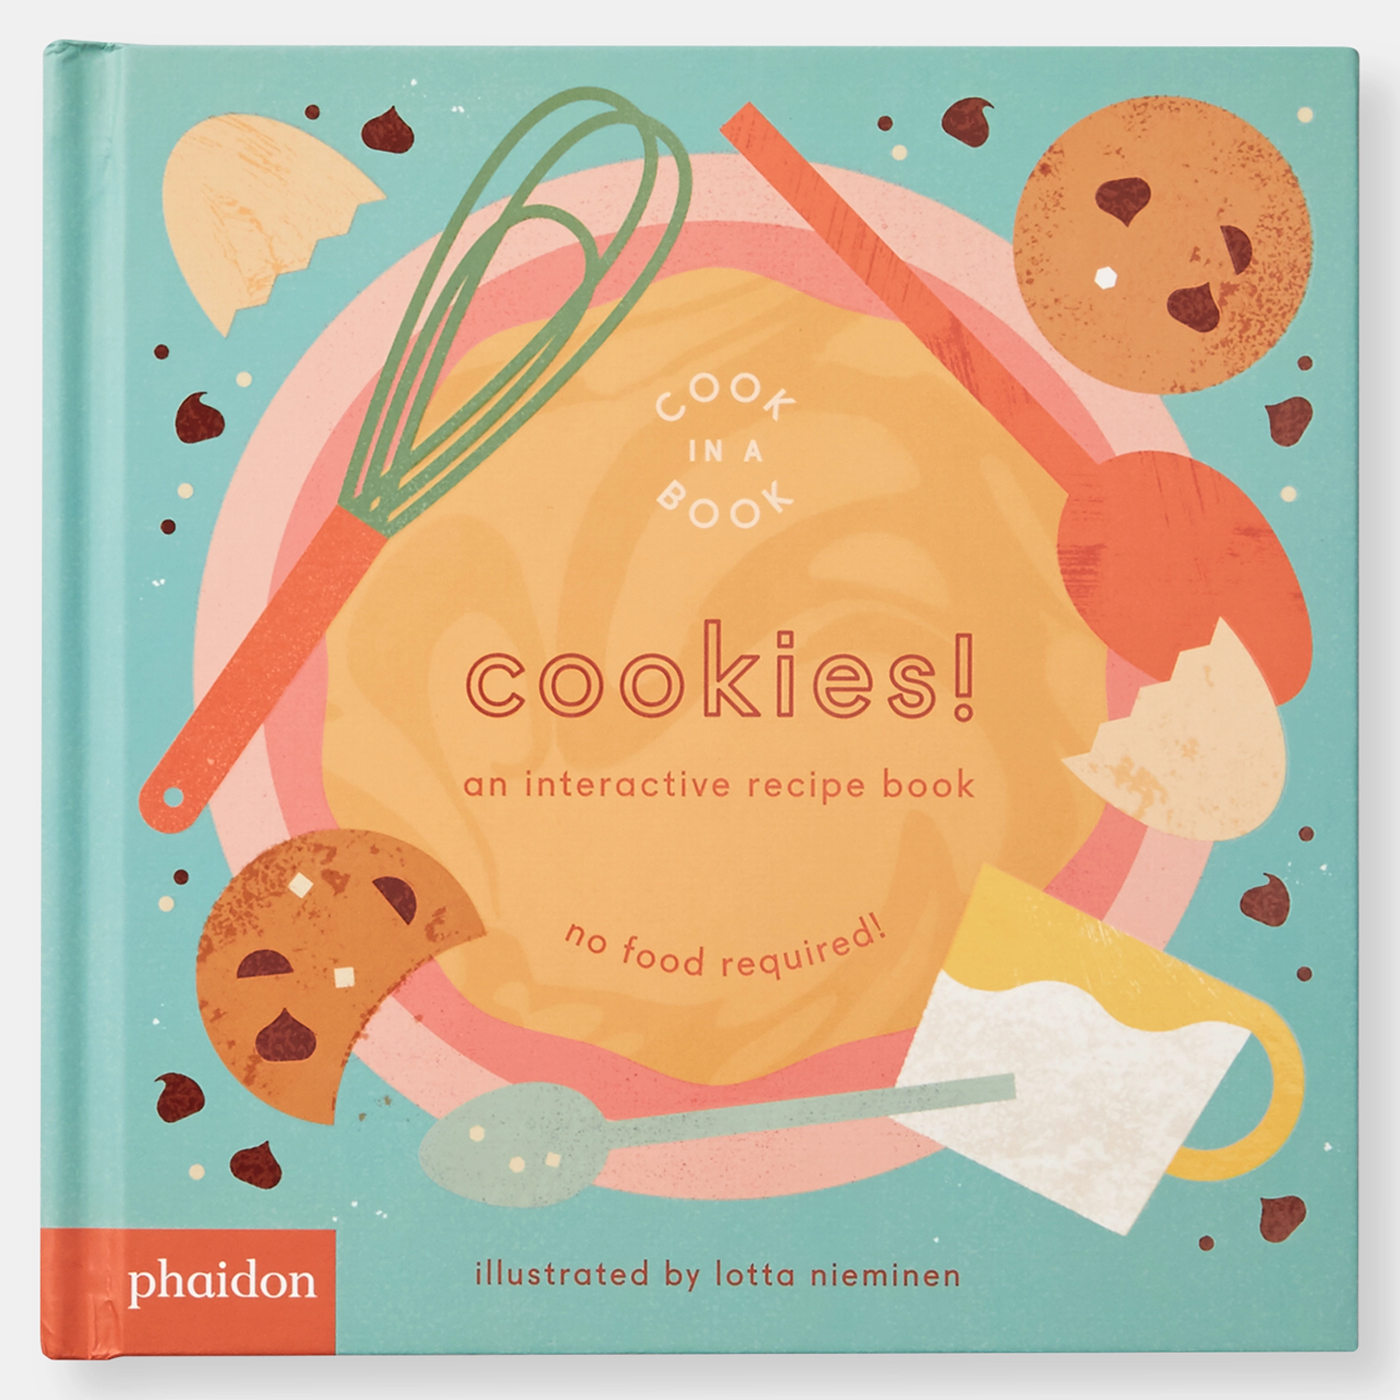 PHAIDON Cook in a Book: Cookies!